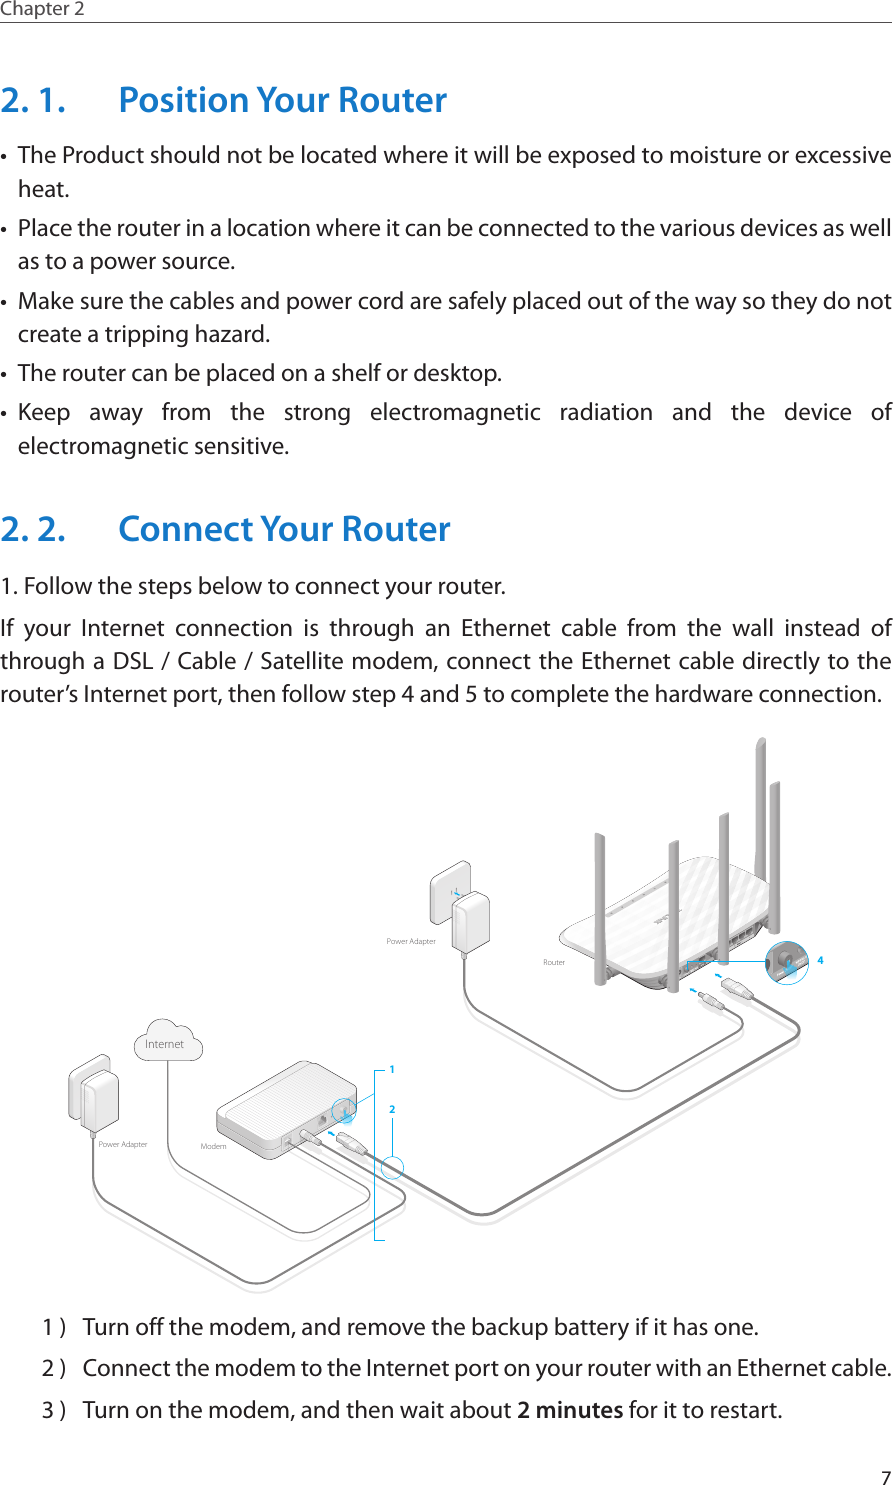 7Chapter 2  2. 1.  Position Your Router•  The Product should not be located where it will be exposed to moisture or excessive heat.•  Place the router in a location where it can be connected to the various devices as well as to a power source.•  Make sure the cables and power cord are safely placed out of the way so they do not create a tripping hazard.•  The router can be placed on a shelf or desktop.•  Keep away from the strong electromagnetic radiation and the device of electromagnetic sensitive.2. 2.  Connect Your Router1. Follow the steps below to connect your router.If your Internet connection is through an Ethernet cable from the wall instead of through a DSL / Cable / Satellite modem, connect the Ethernet cable directly to the router’s Internet port, then follow step 4 and 5 to complete the hardware connection.412ModemRouterInternetPower AdapterPower Adapter1 )  Turn off the modem, and remove the backup battery if it has one.2 )  Connect the modem to the Internet port on your router with an Ethernet cable.3 )  Turn on the modem, and then wait about 2 minutes for it to restart.